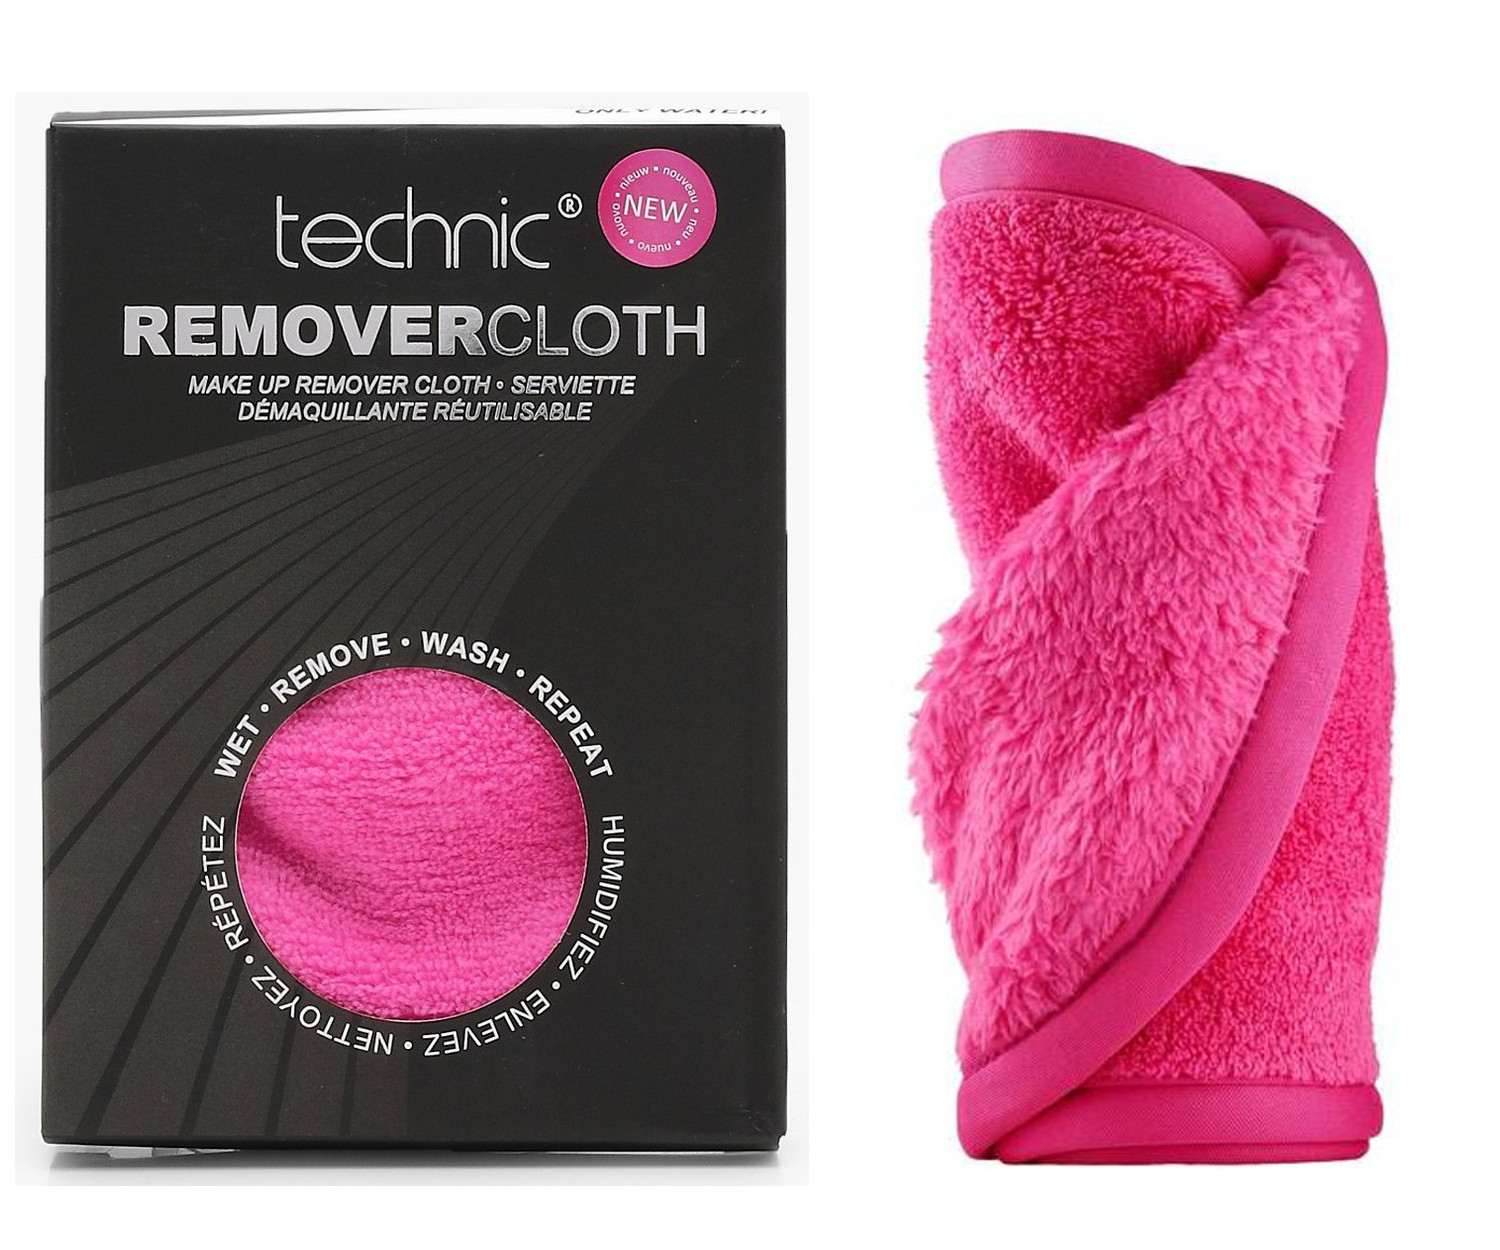 Technic Makeup Remover Cloth - Affordable Makeup For